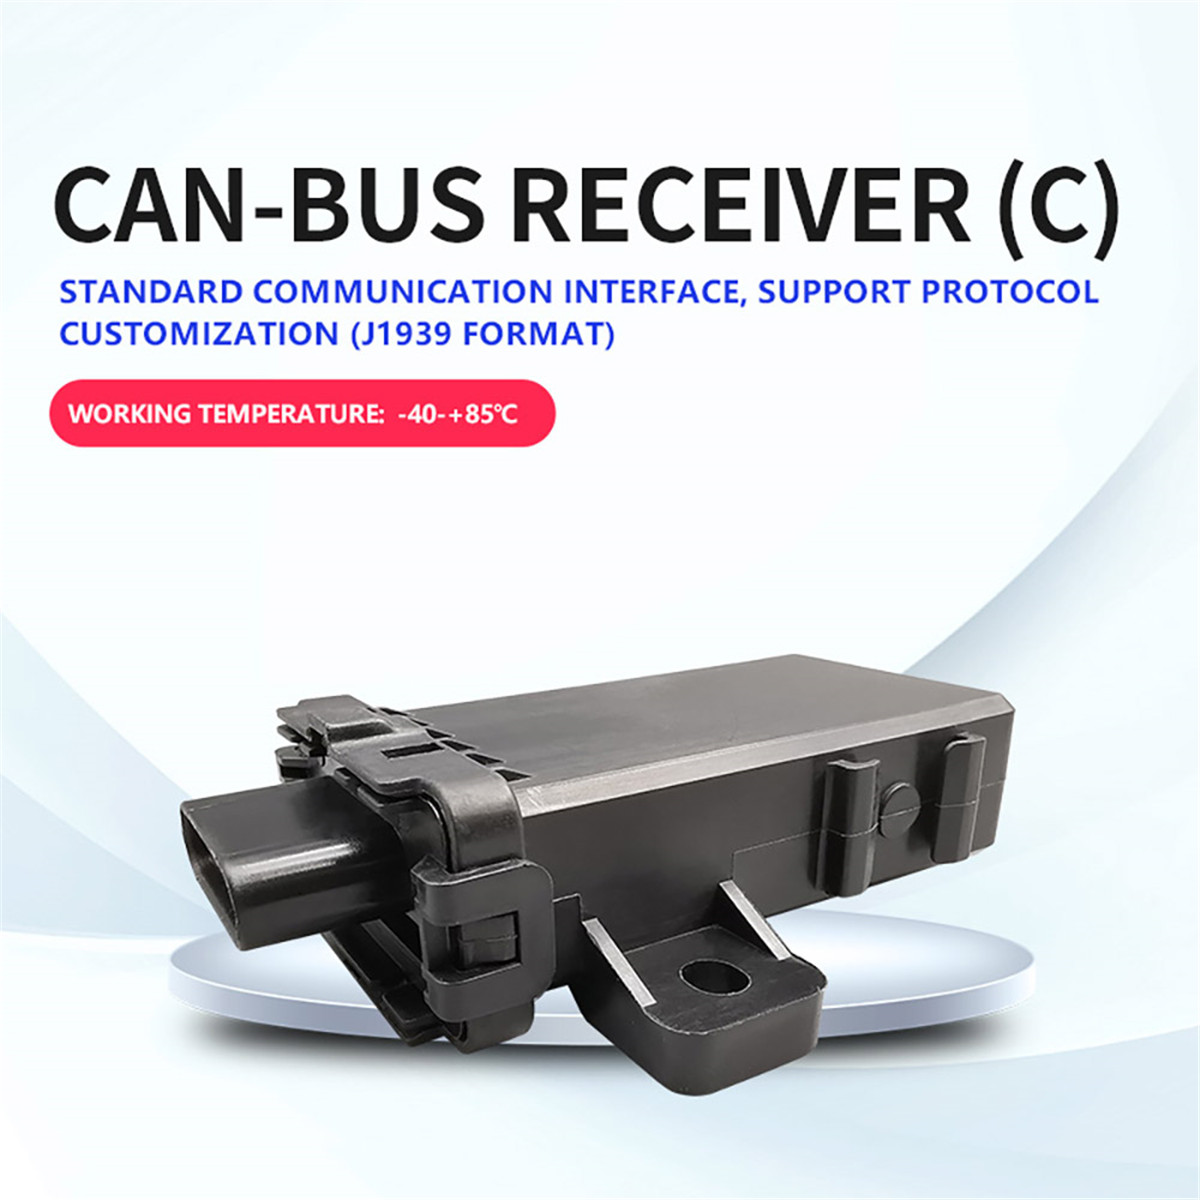 CAN-Bus receiver01 (9)